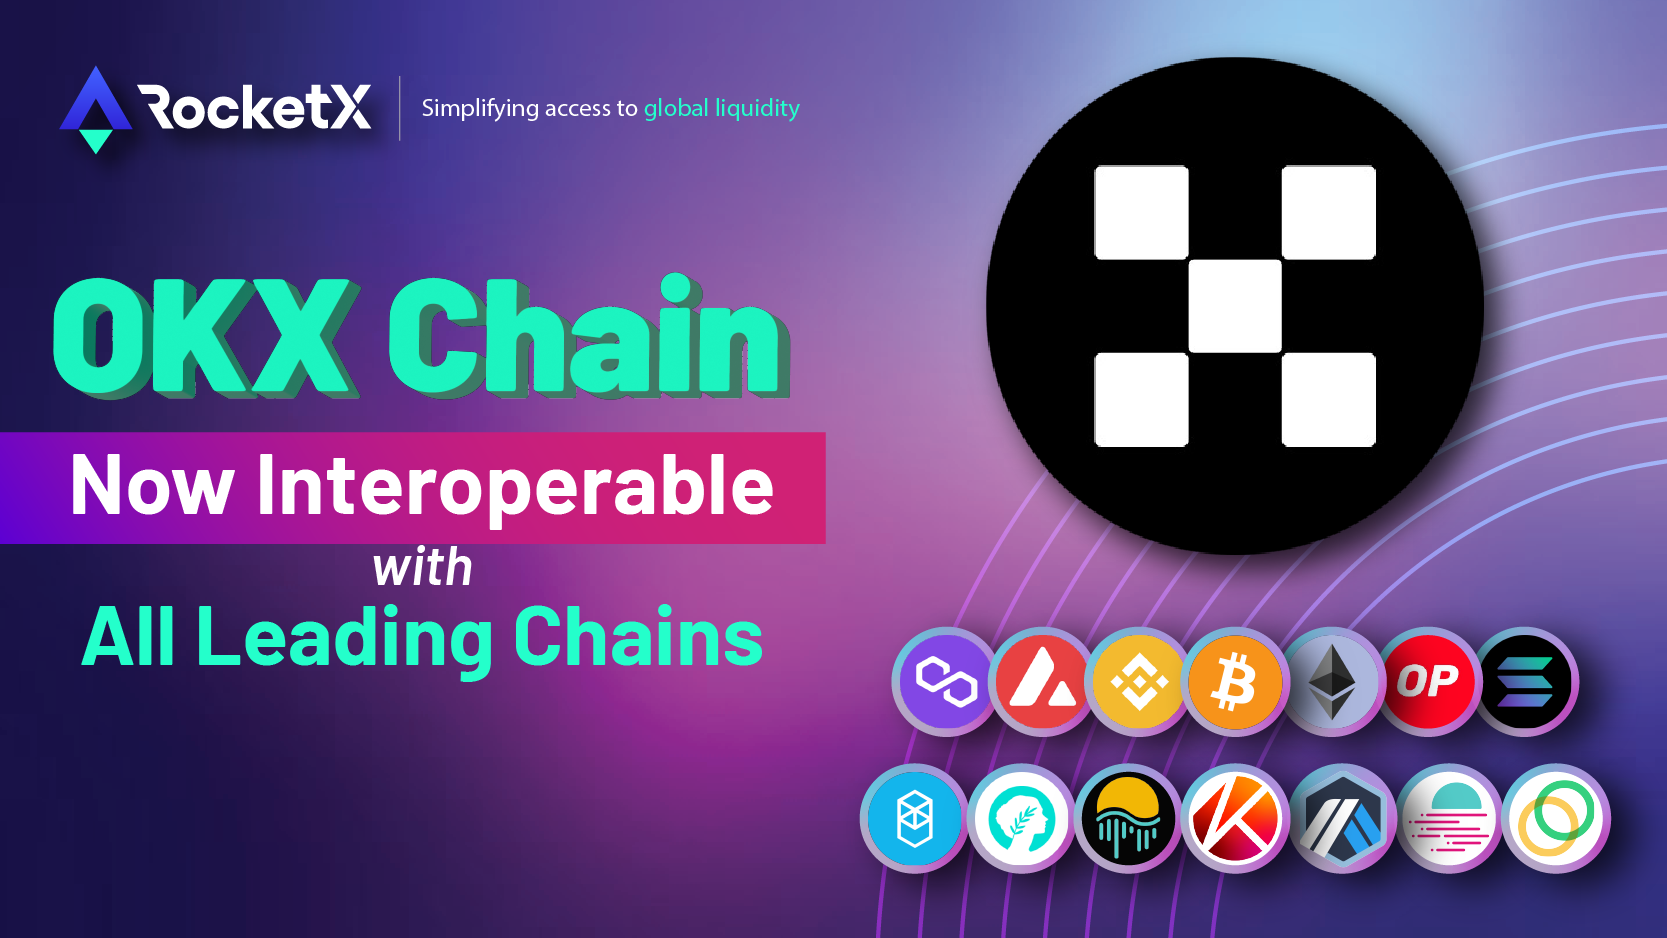 OKX Chain is now interoperable with 15 leading blockchains, including Bitcoin (BTC), Ethereum (ETH), BNB Chain (BNB), Polygon (MATIC), Avalanche (AVAX)